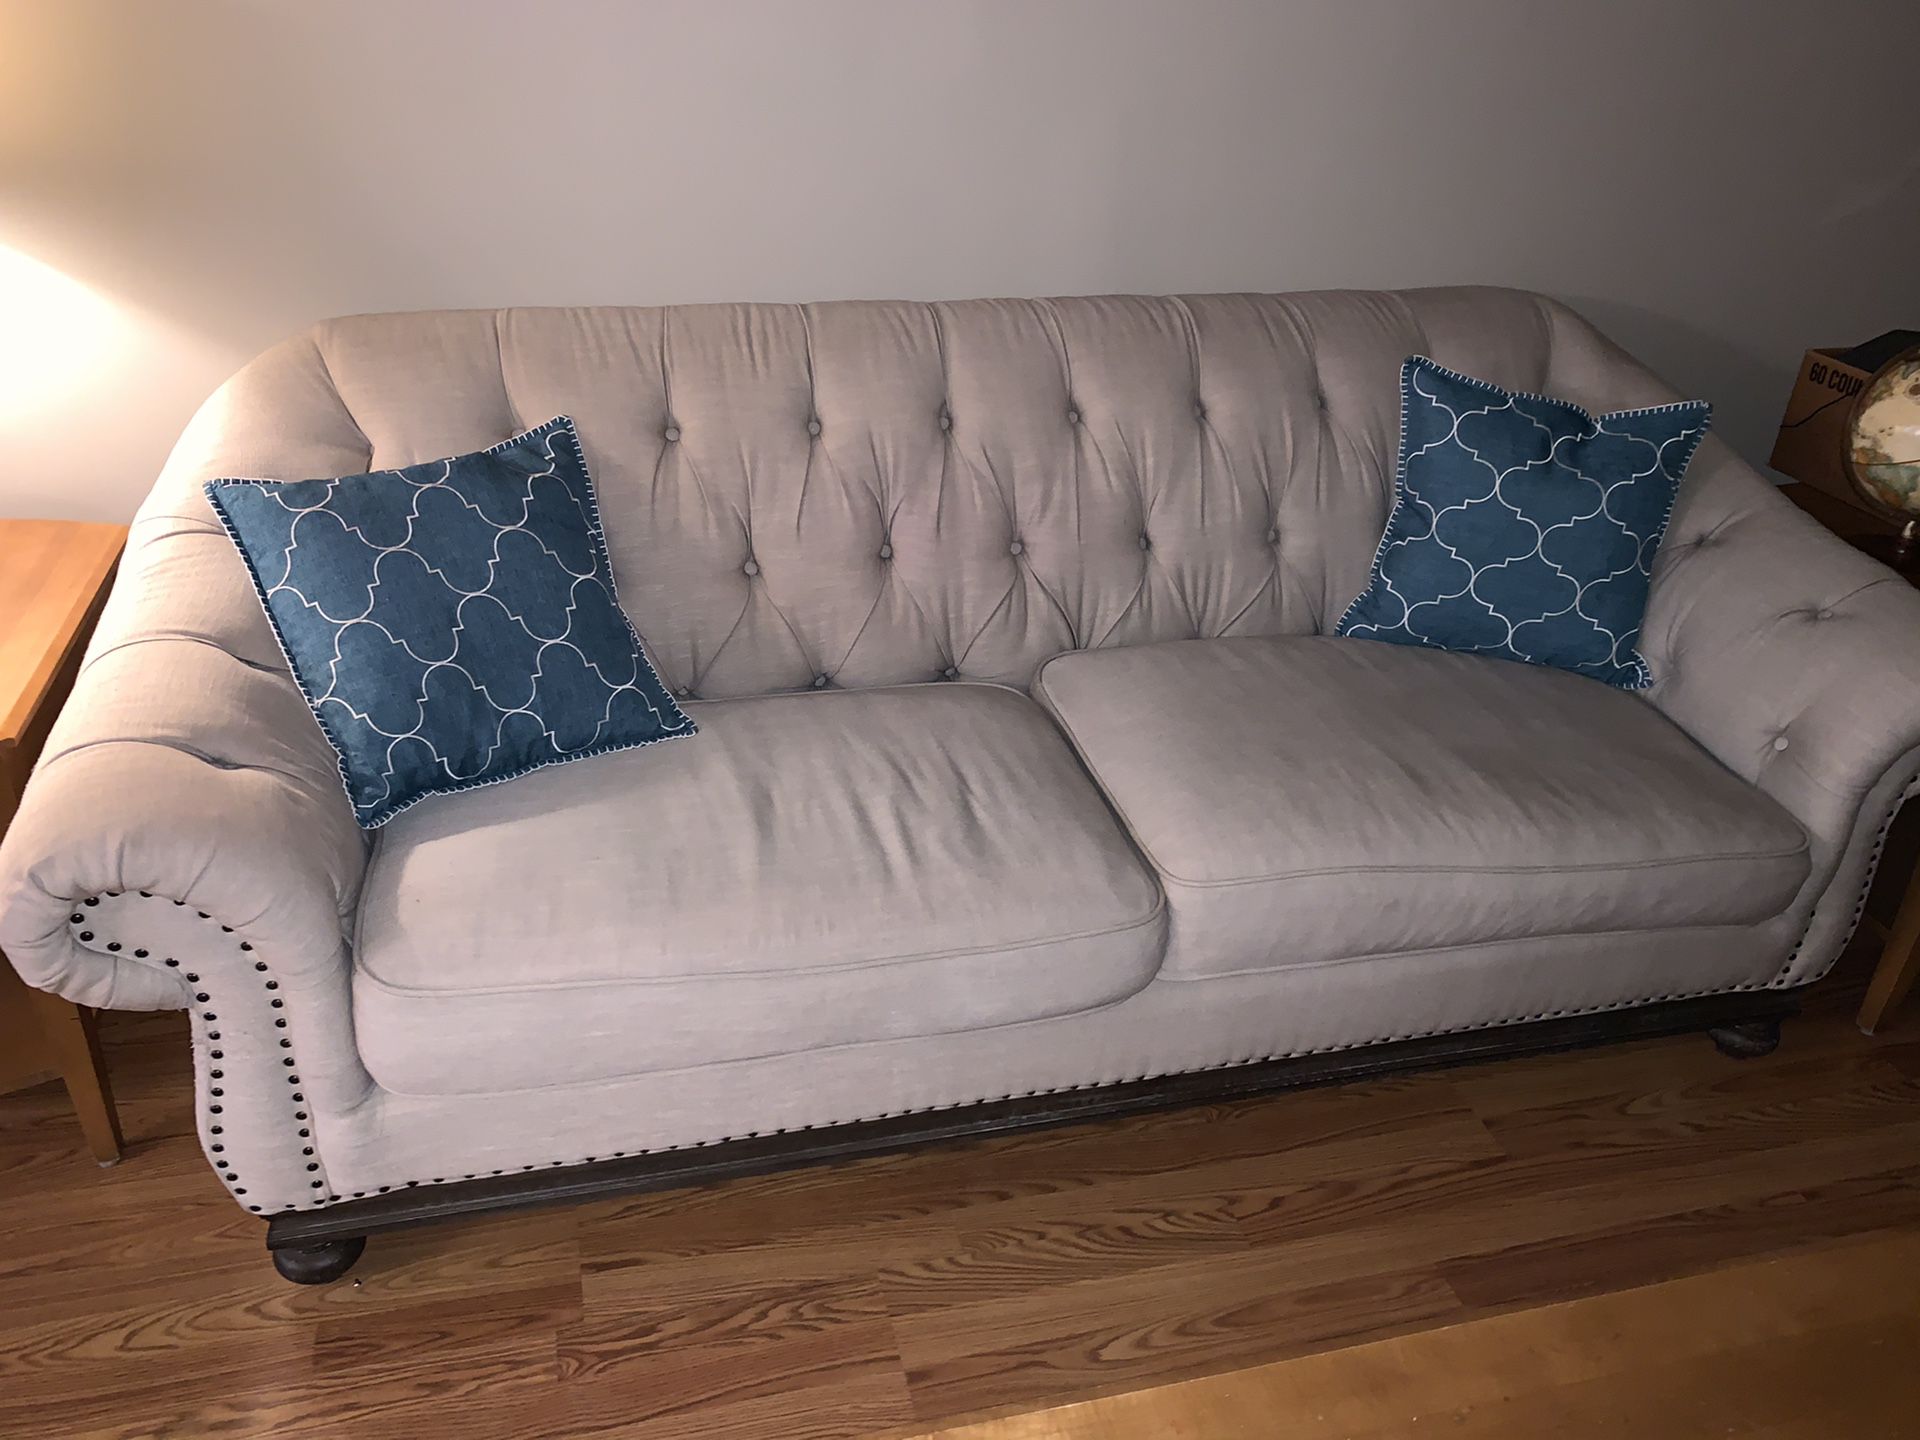 FREE couch